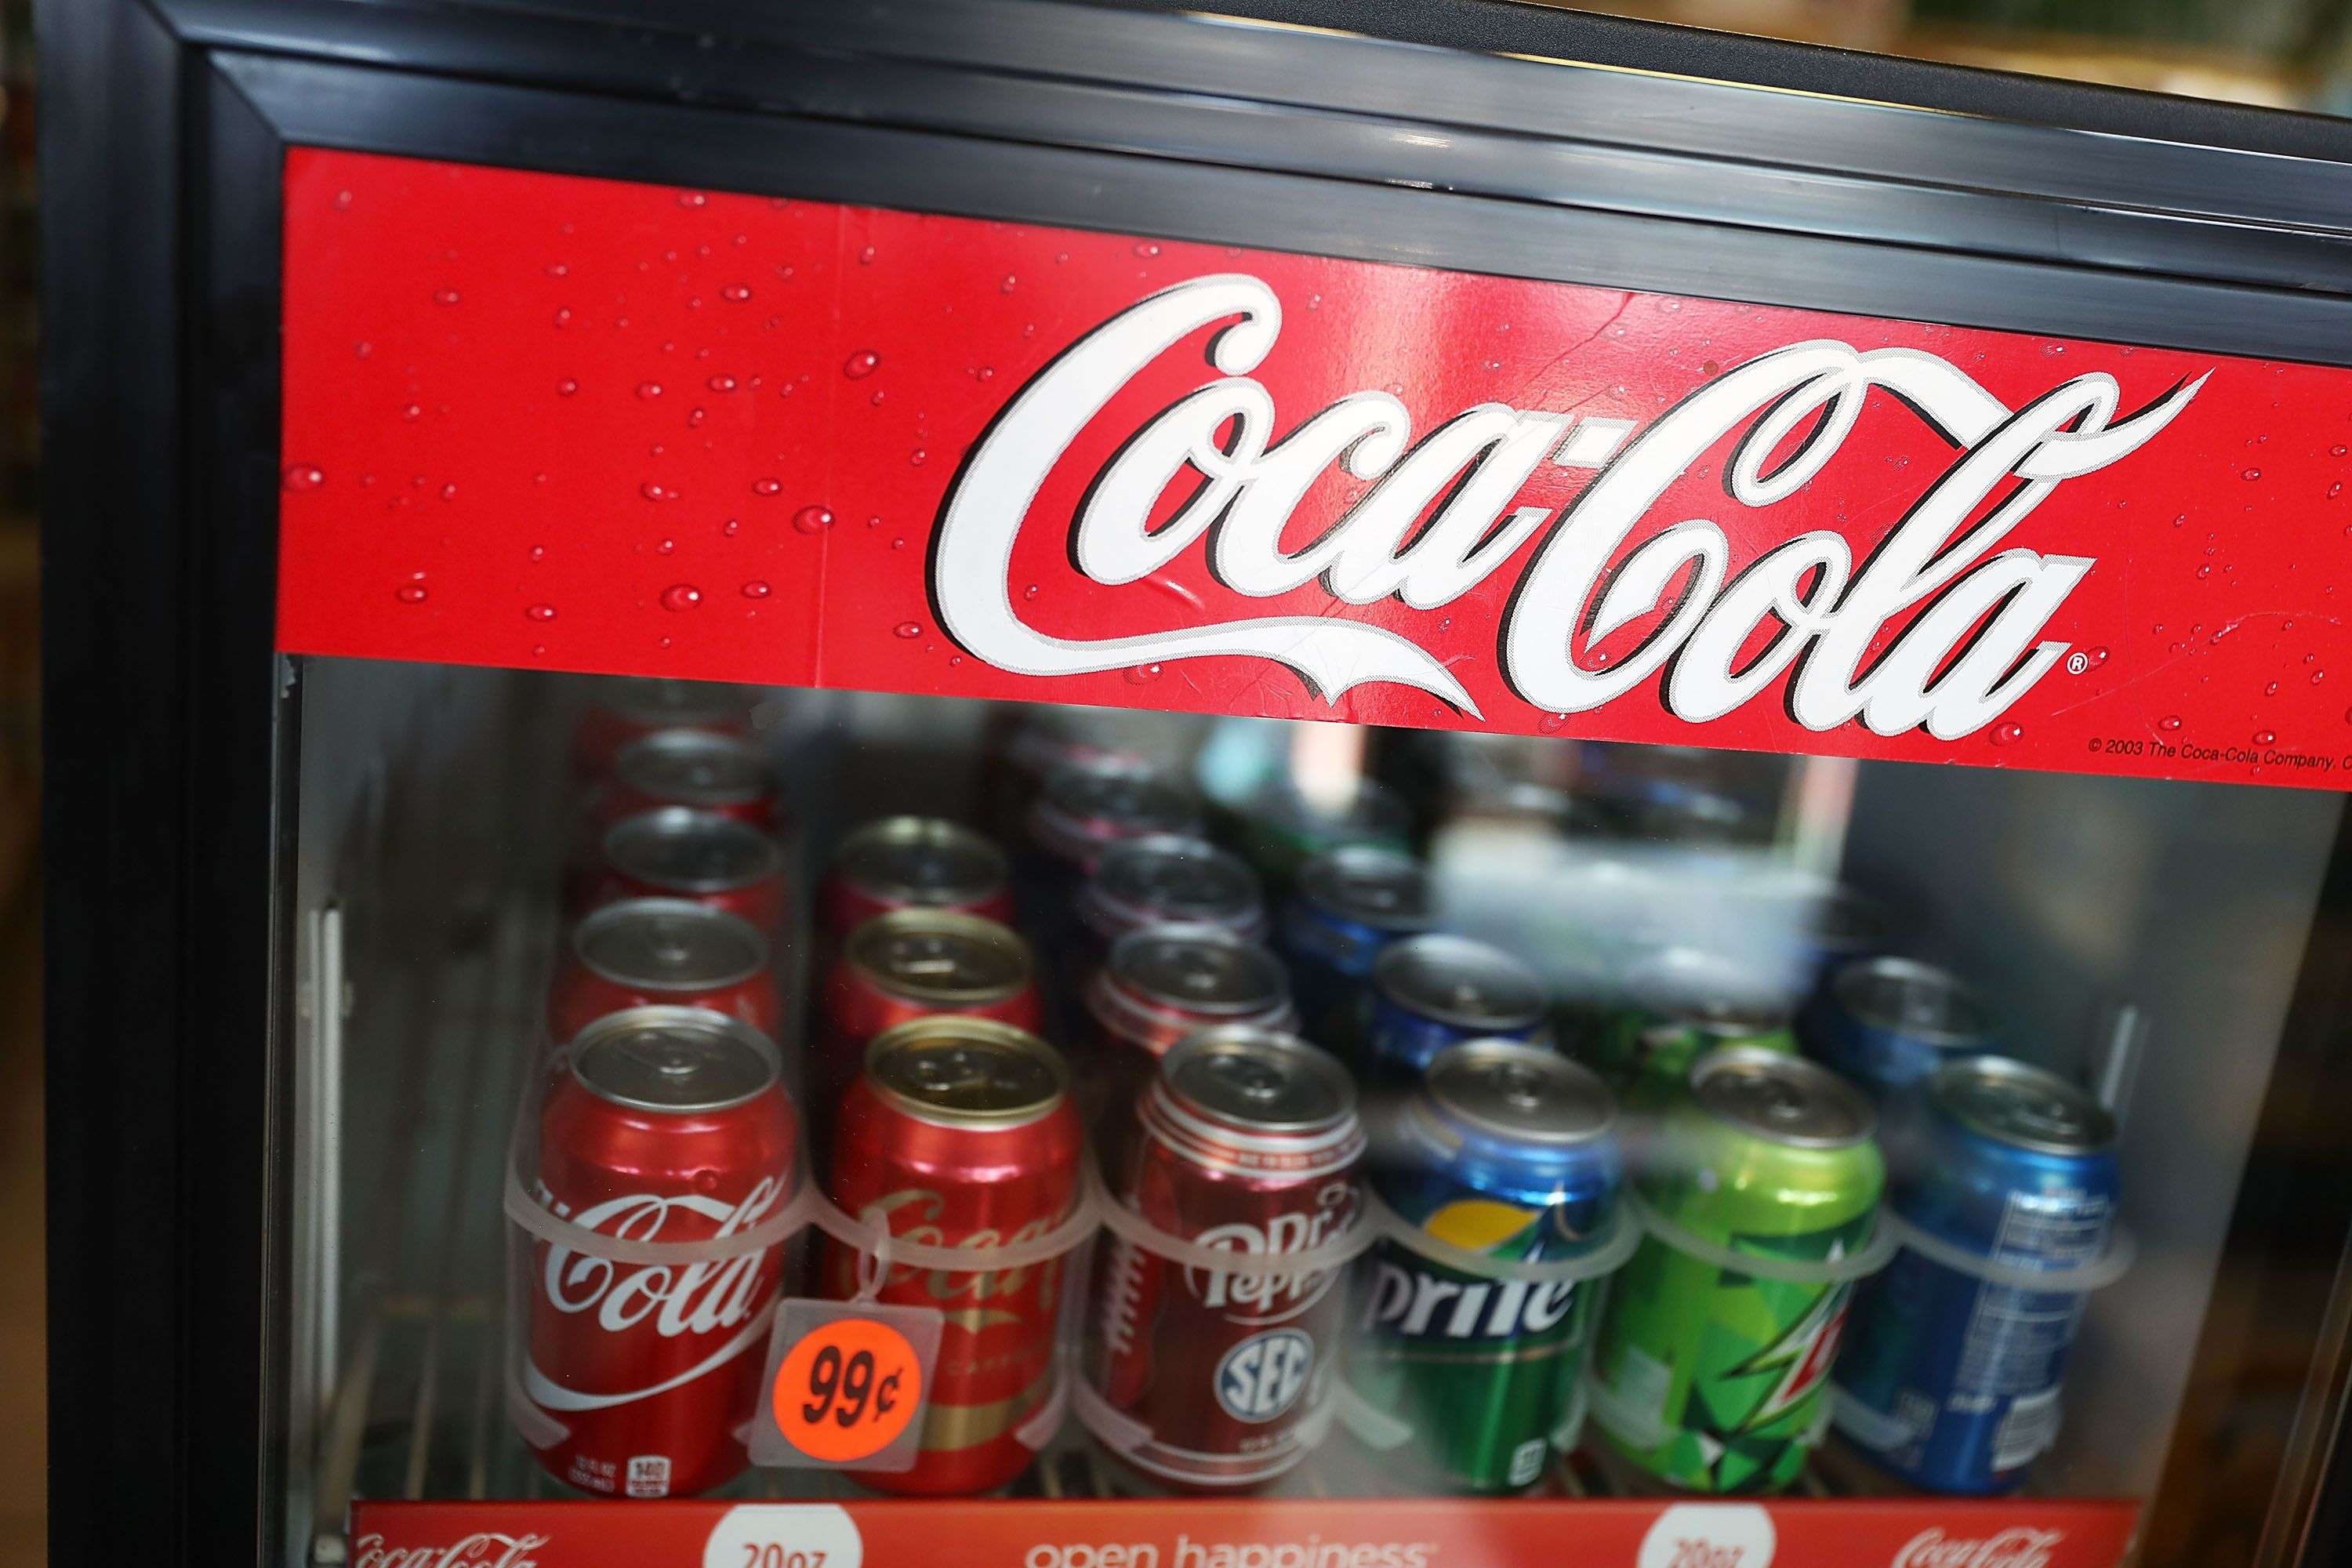 A Coca Cola sign is seen as Coke products are on display in a store as the company announces plans to cut 1200 corporate staff jobs. The announced changes come as the company battles a slide in soda sales which along with higher costs has lead to a 20 per cent drop in quarterly profit. Photo: AFP